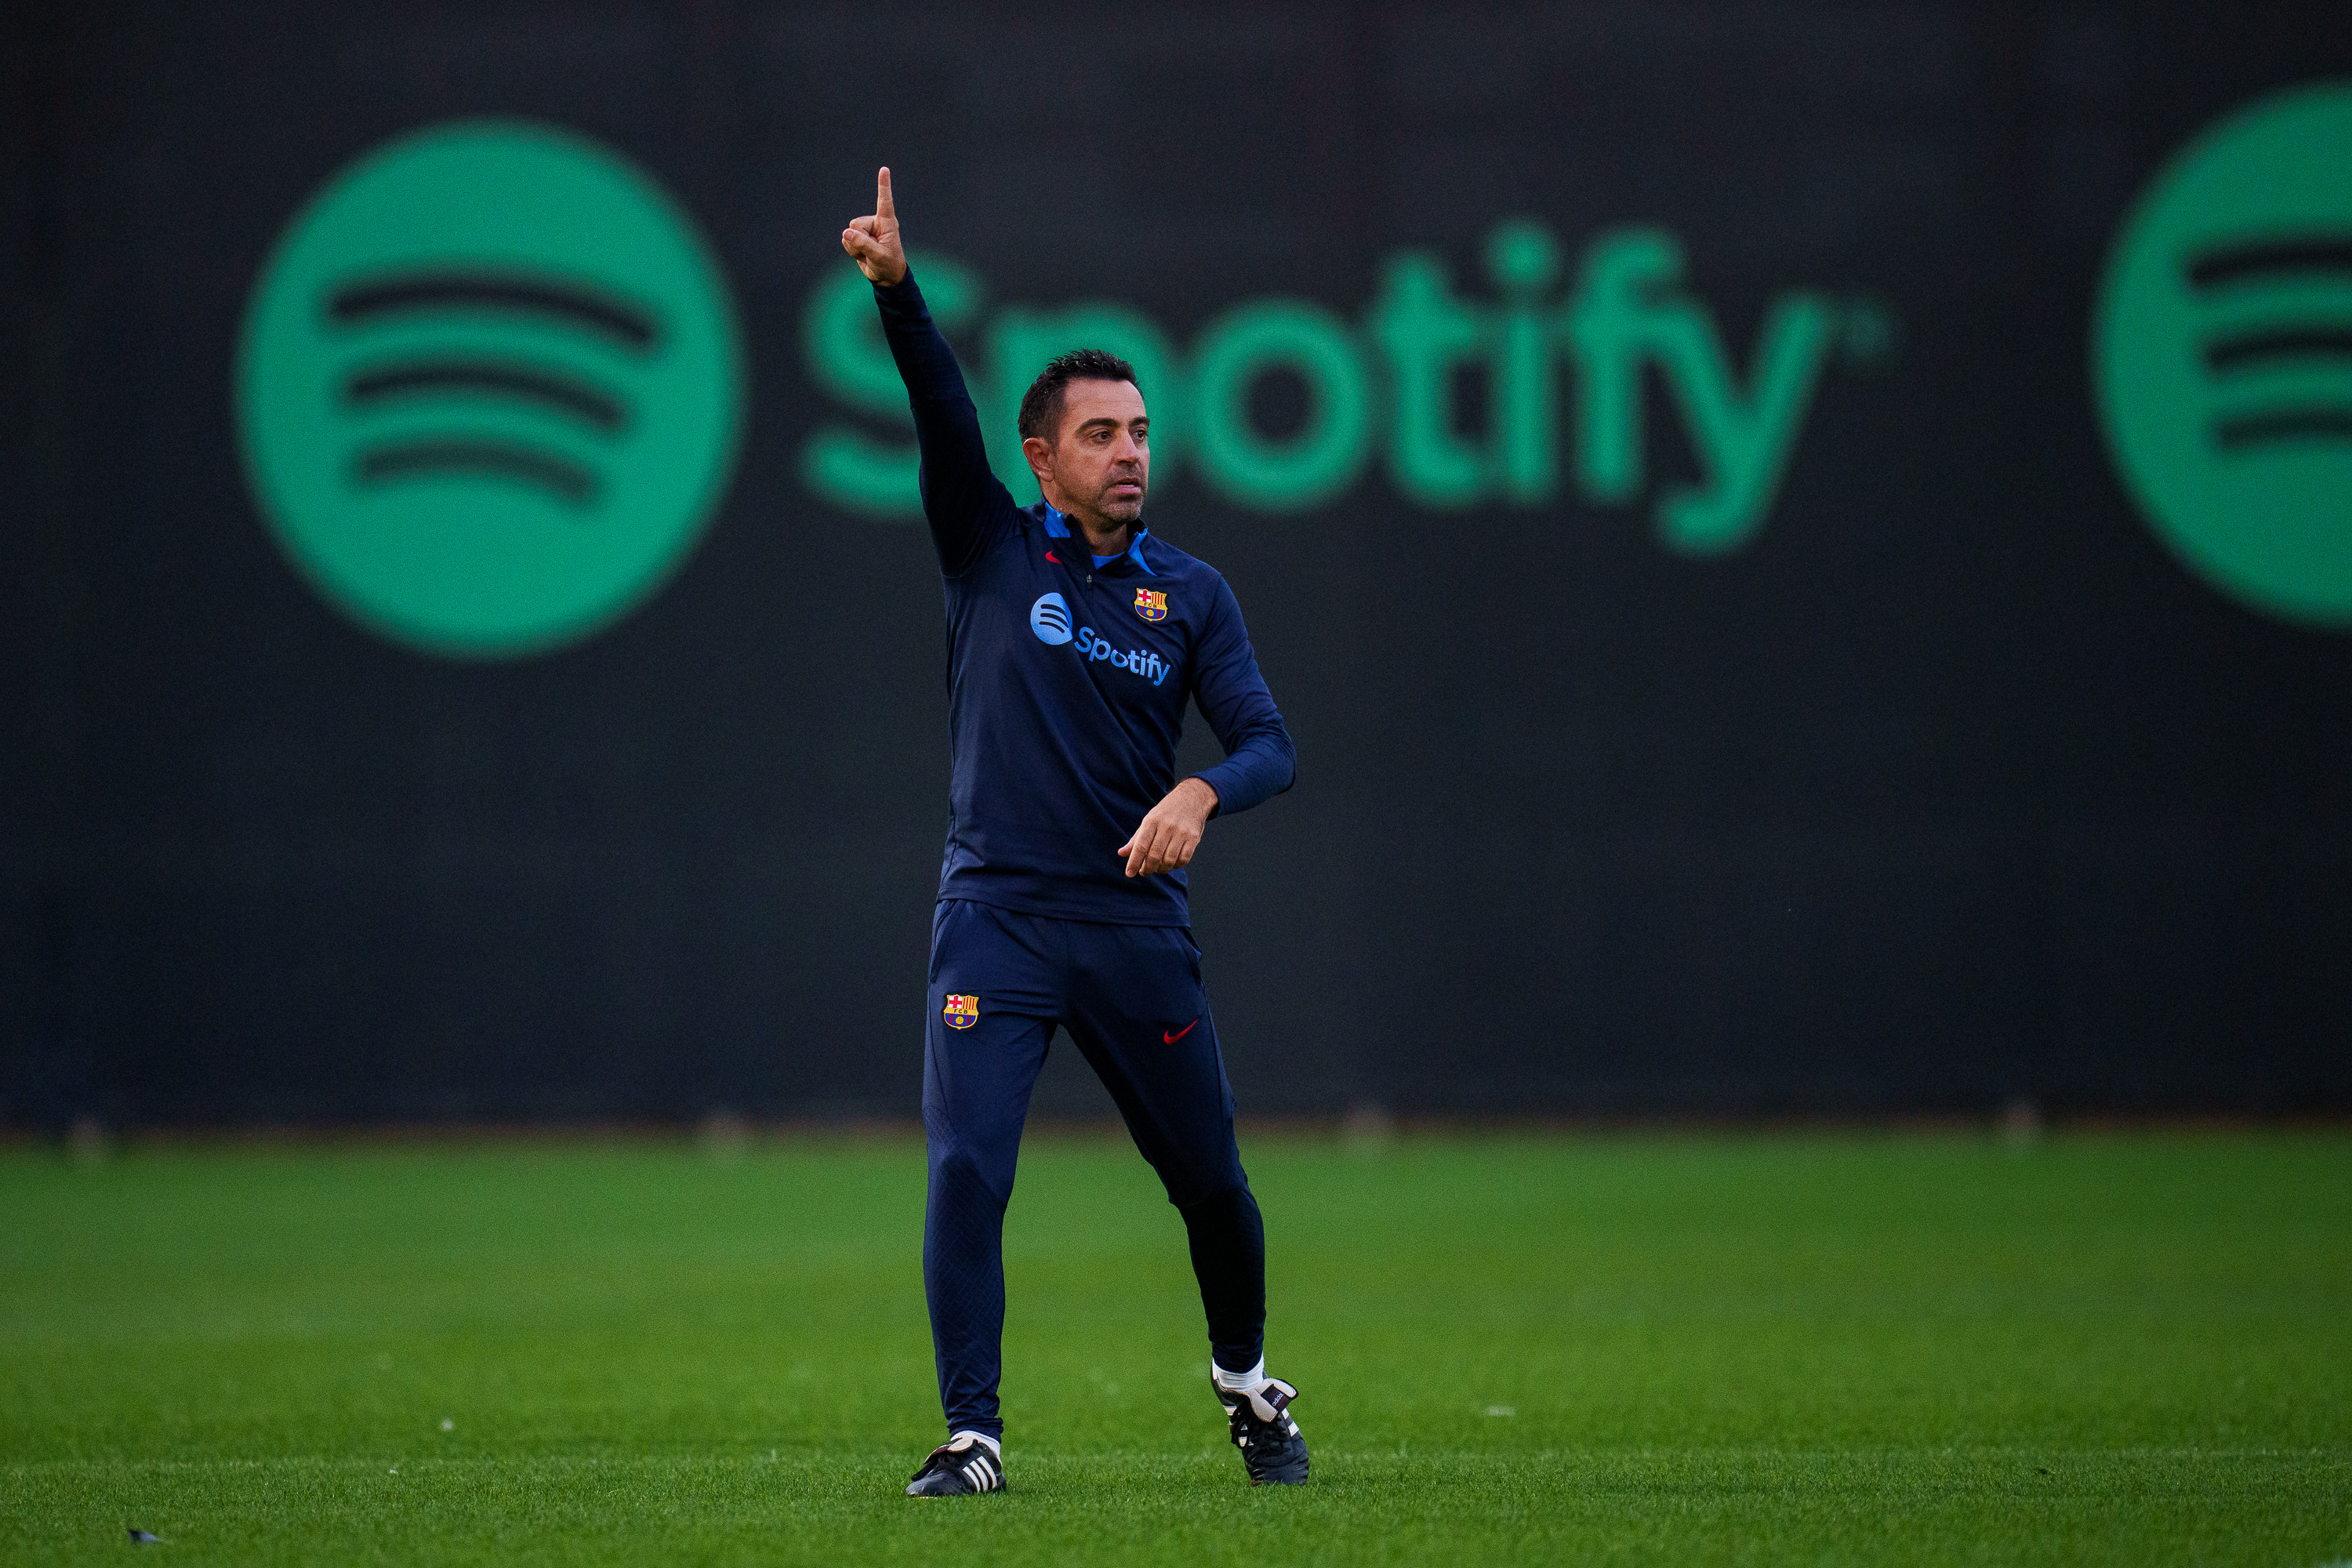 Would be massive disappointment not go through but we’re thinking positively, claims Xavi Hernandez